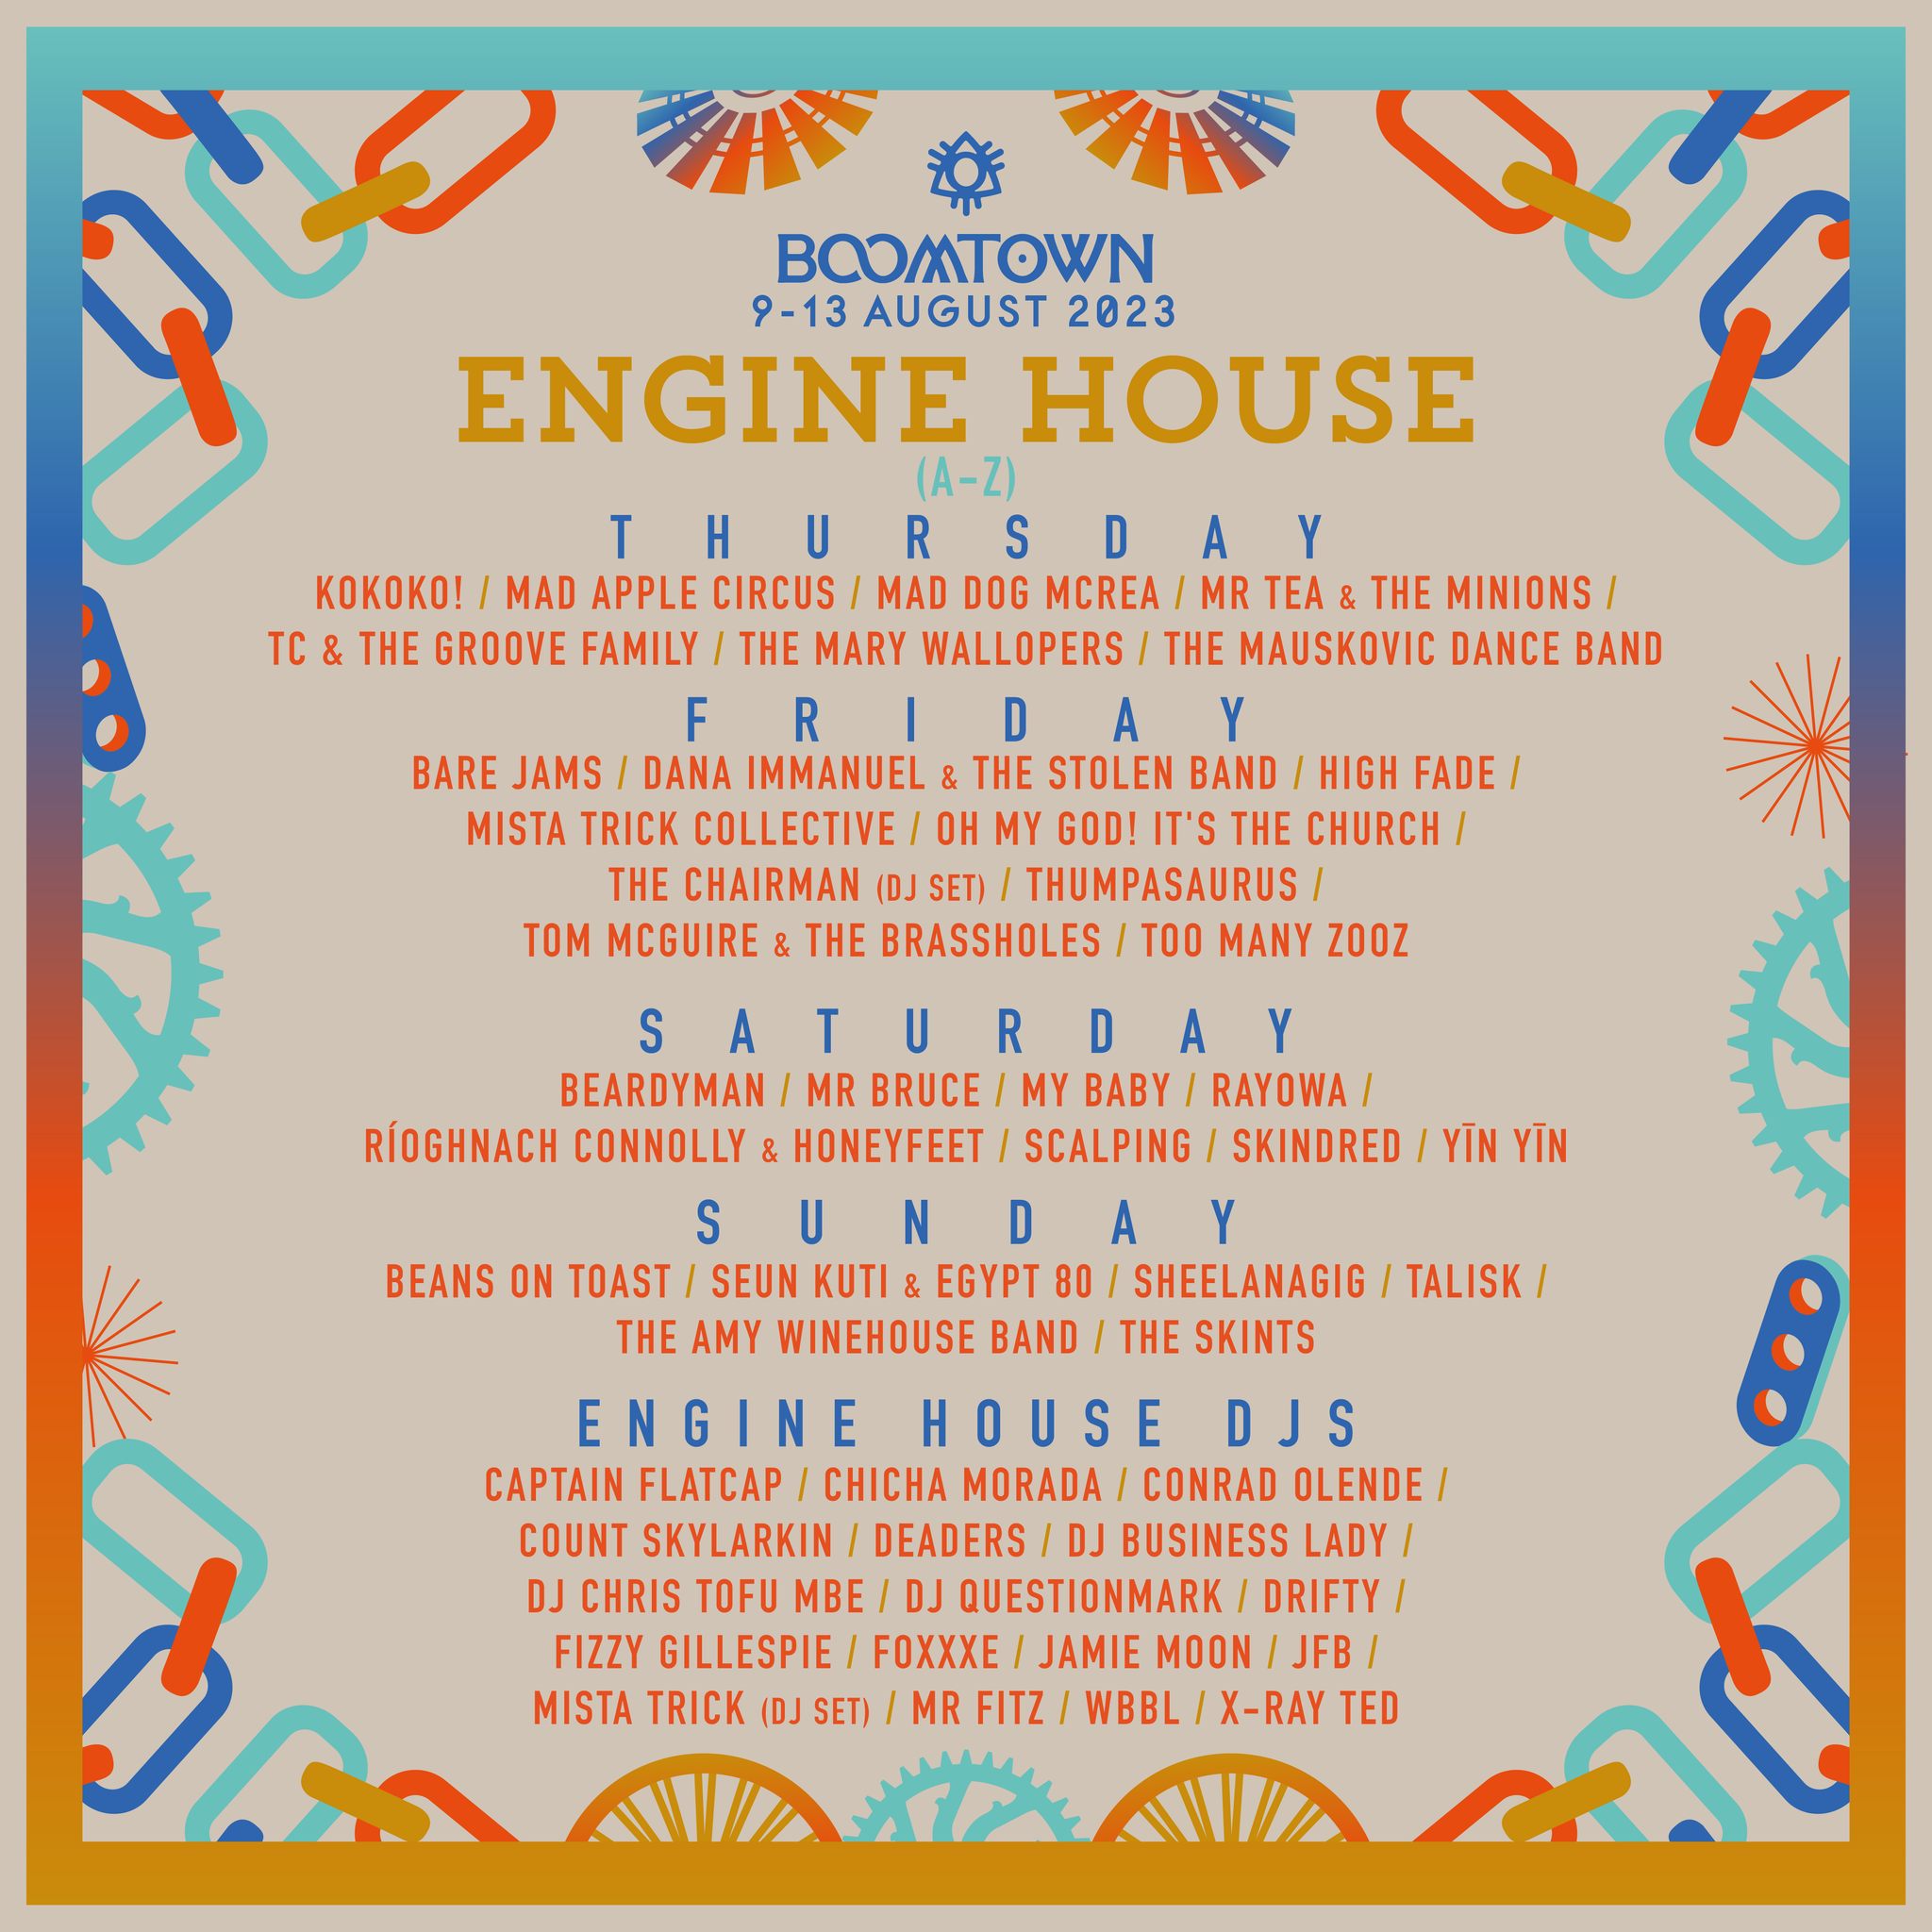 Boomtown Engine House Lineup 2023